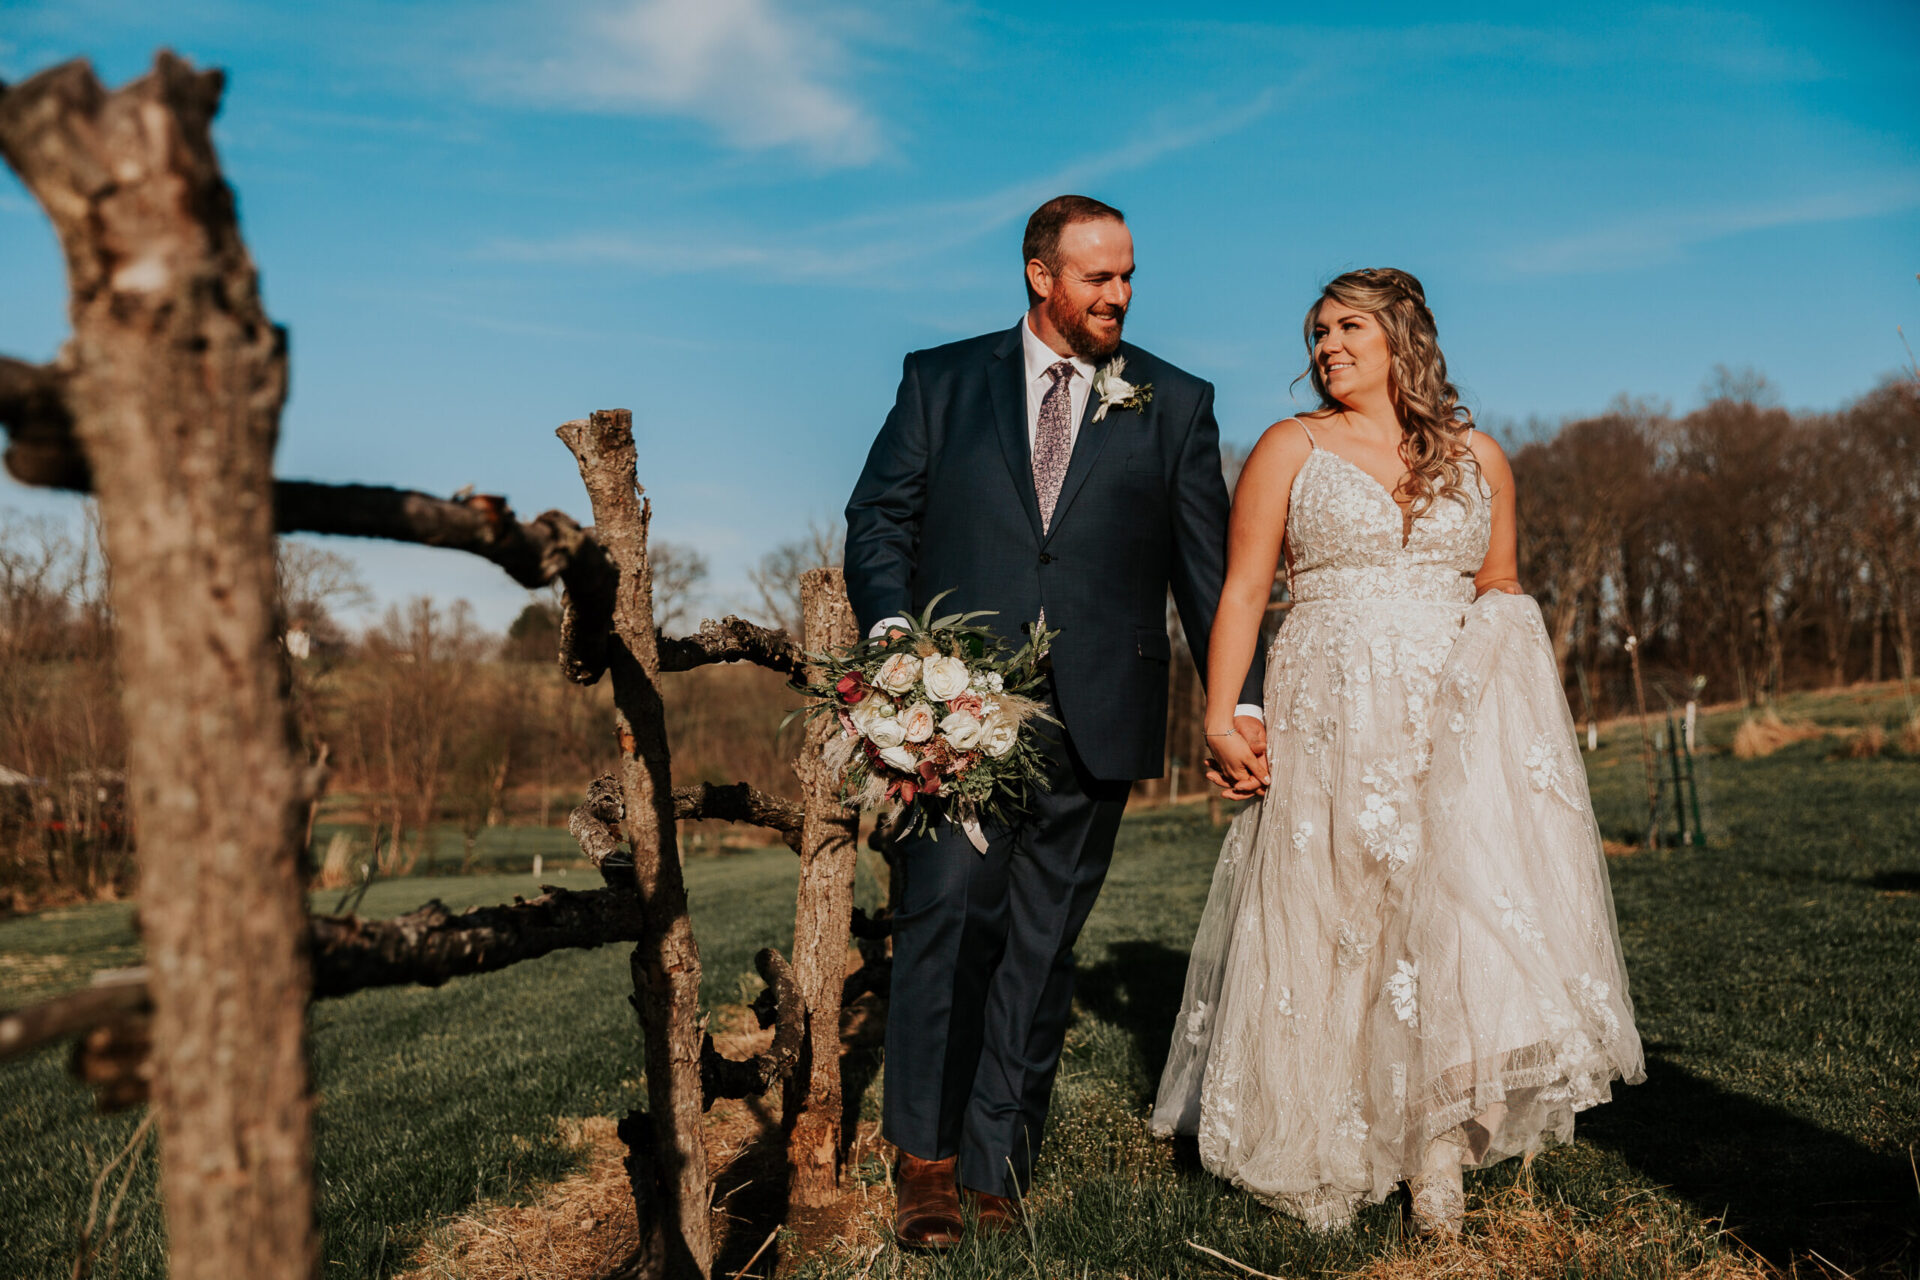 Zion Springs bride and groom strolling past rustic wood fence